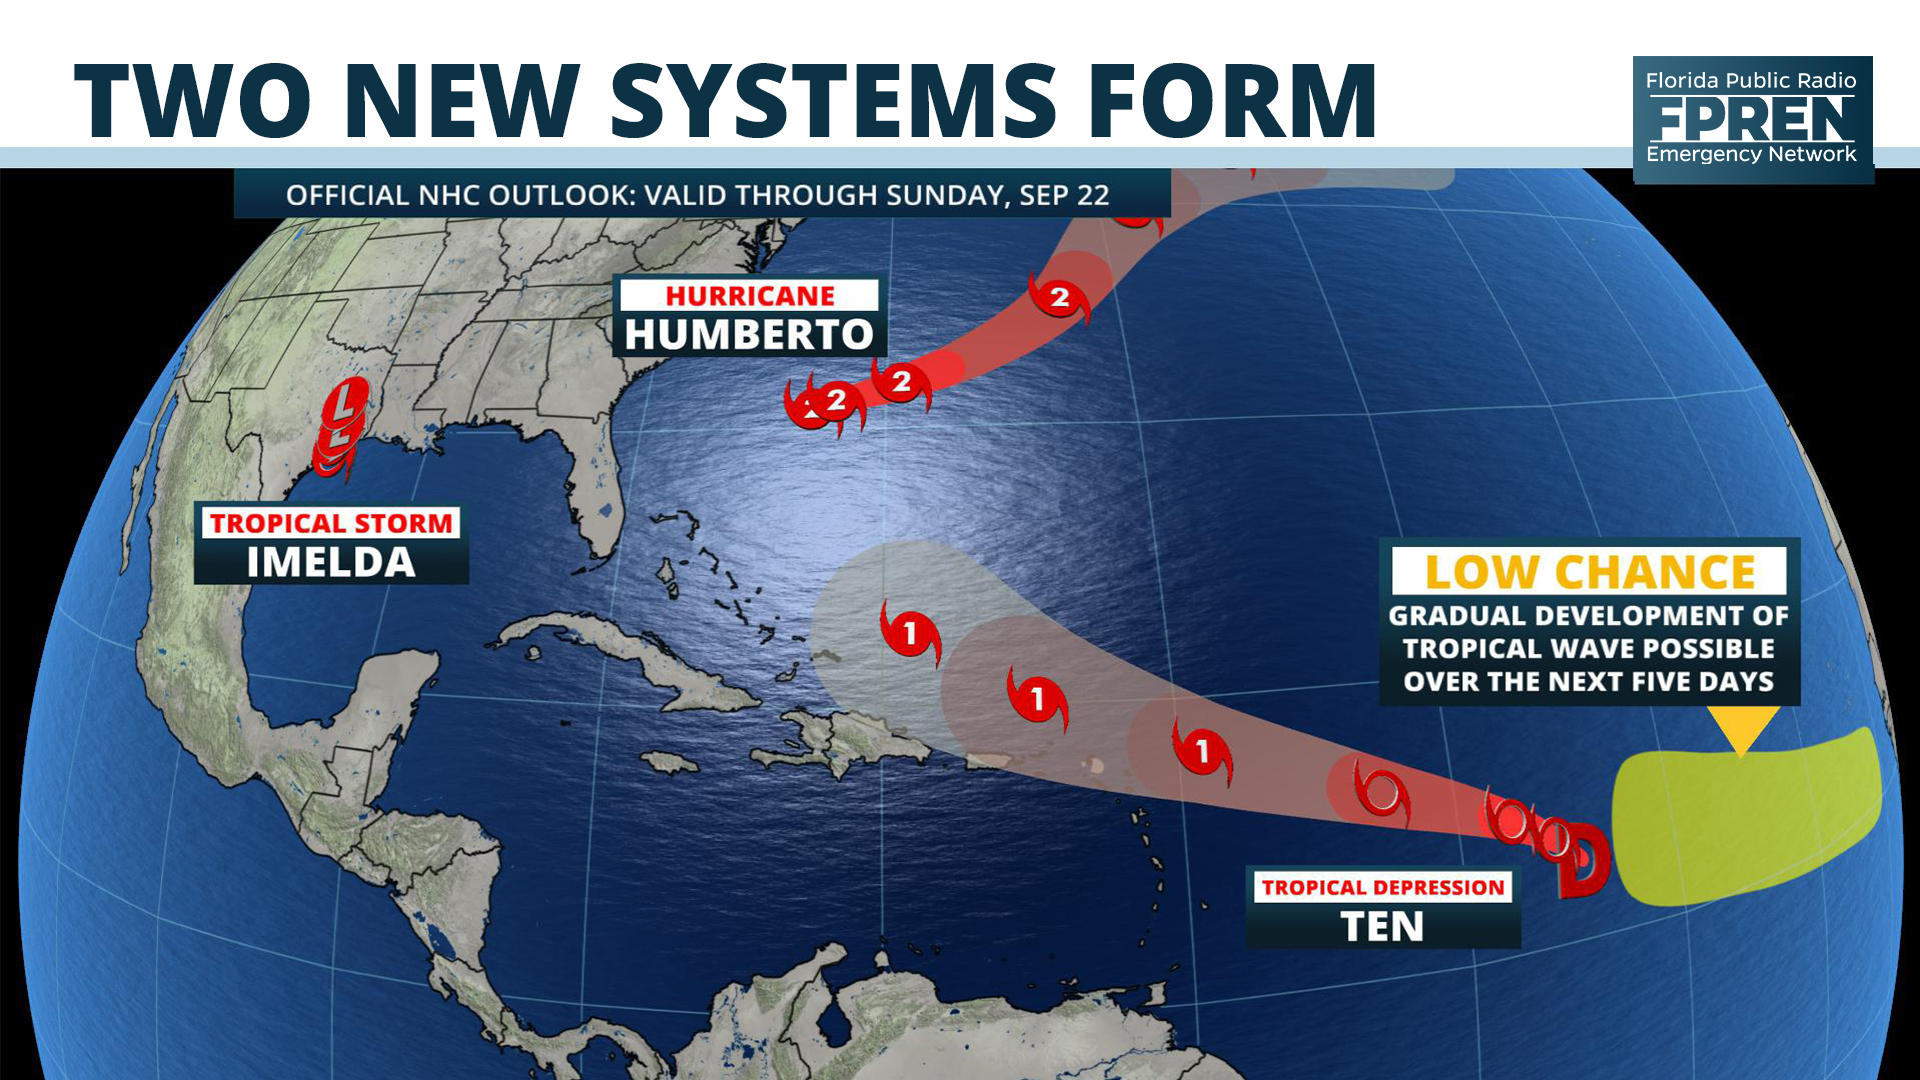 Two New Tropical Systems Formed Tuesday, as Humberto Heads for Bermuda